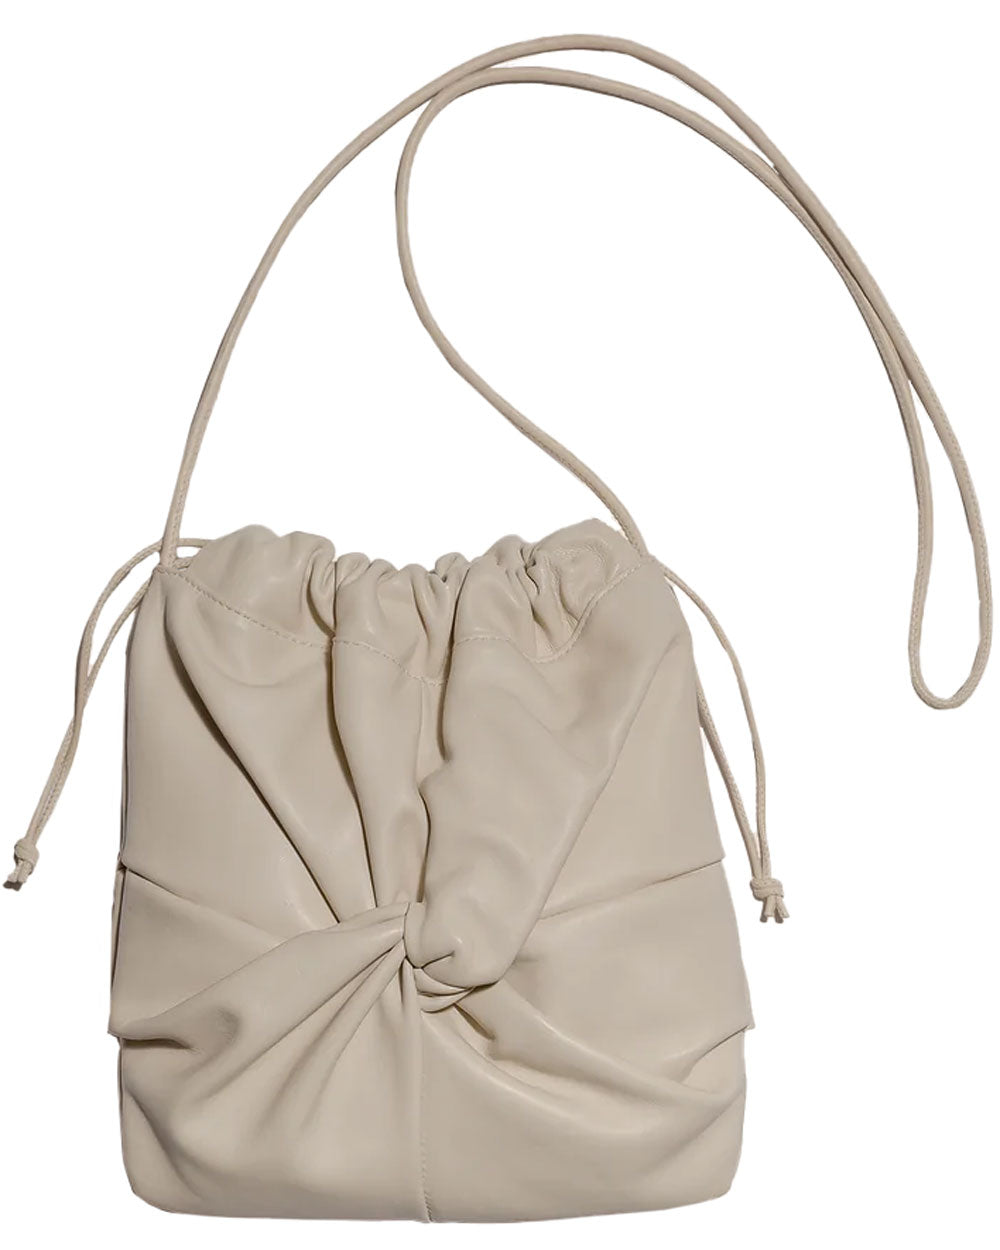 Ronet Twisted Crossbody Bag in Ice